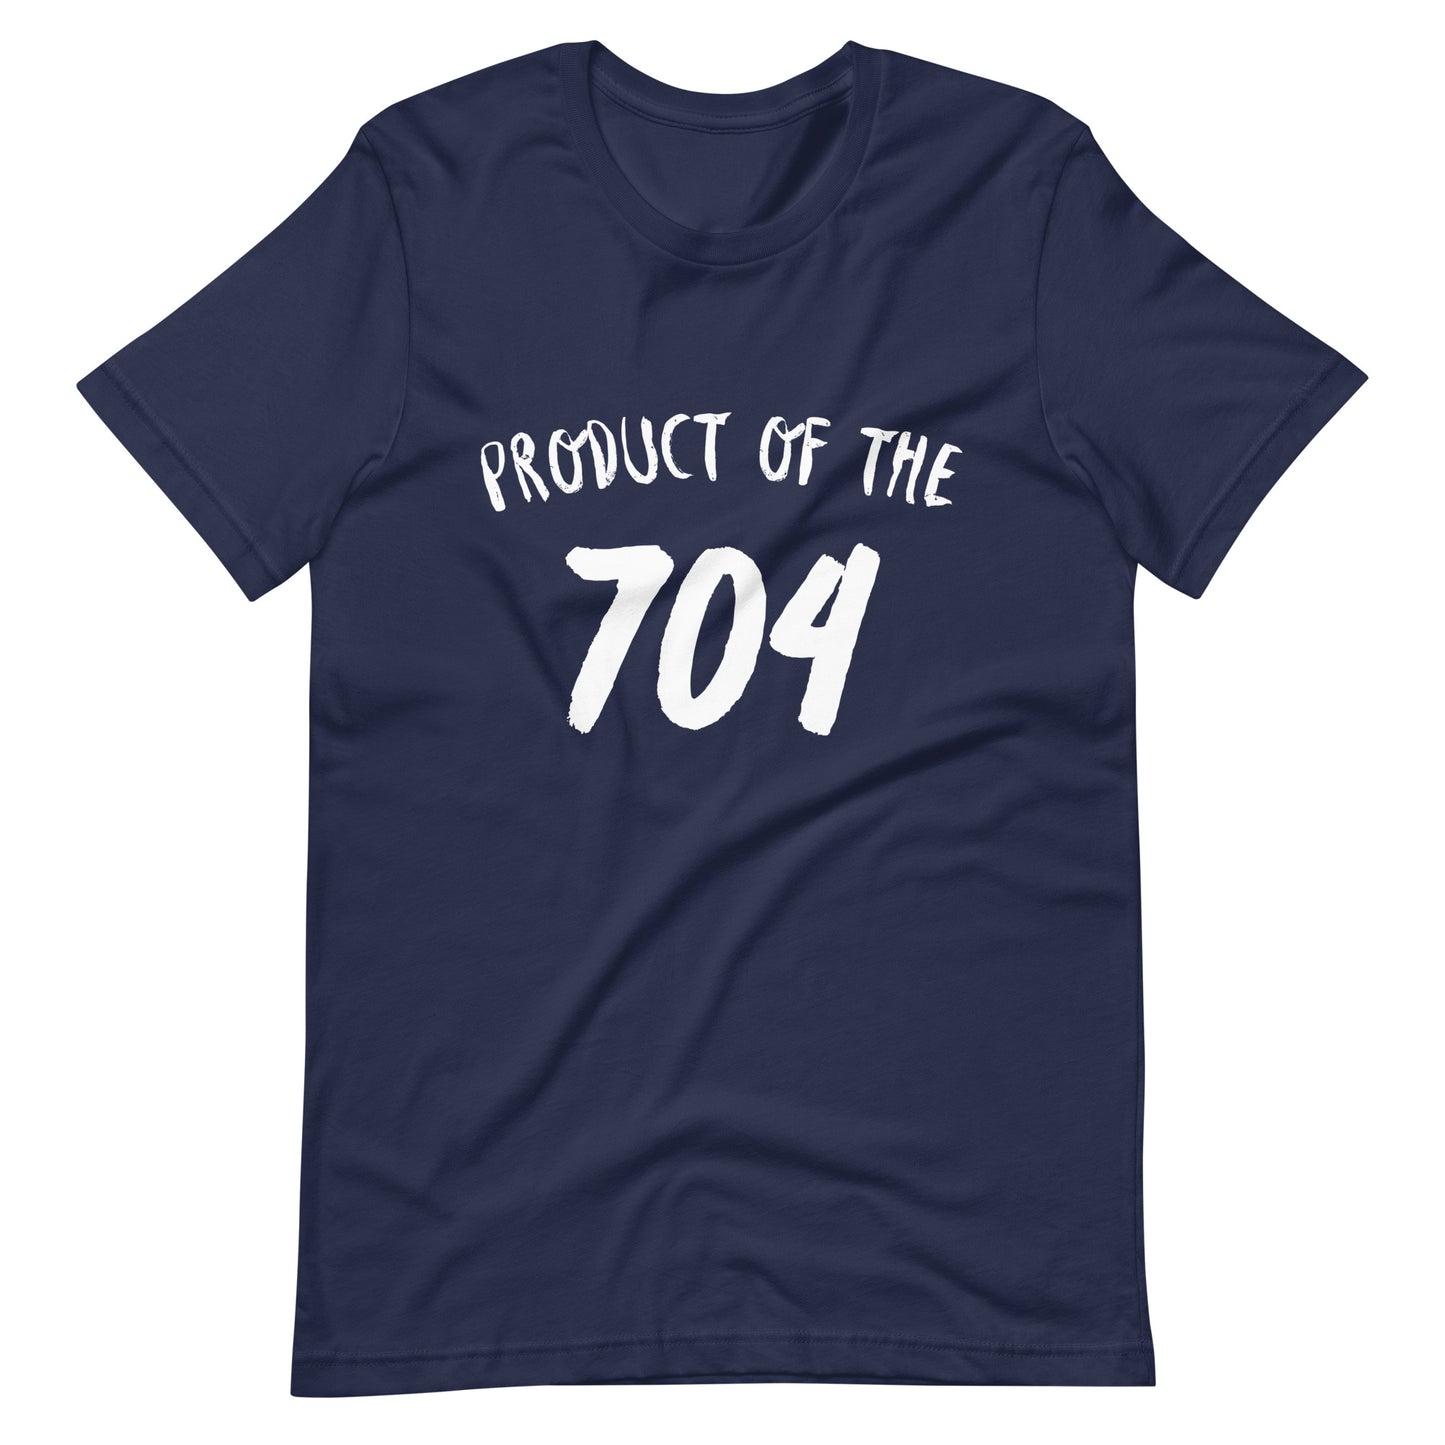 Product of the "704" Unisex t-shirt